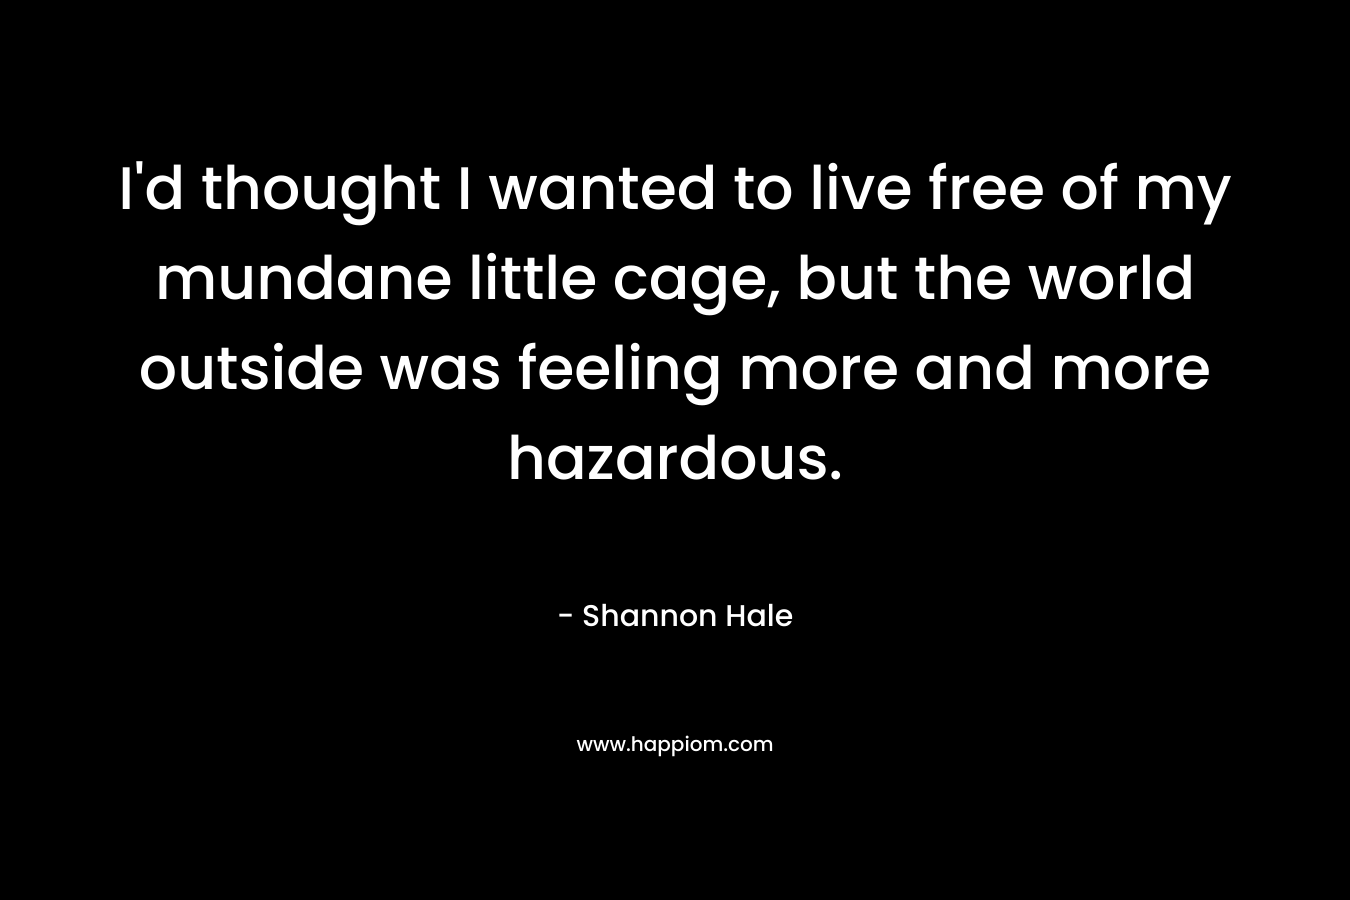 I’d thought I wanted to live free of my mundane little cage, but the world outside was feeling more and more hazardous. – Shannon Hale